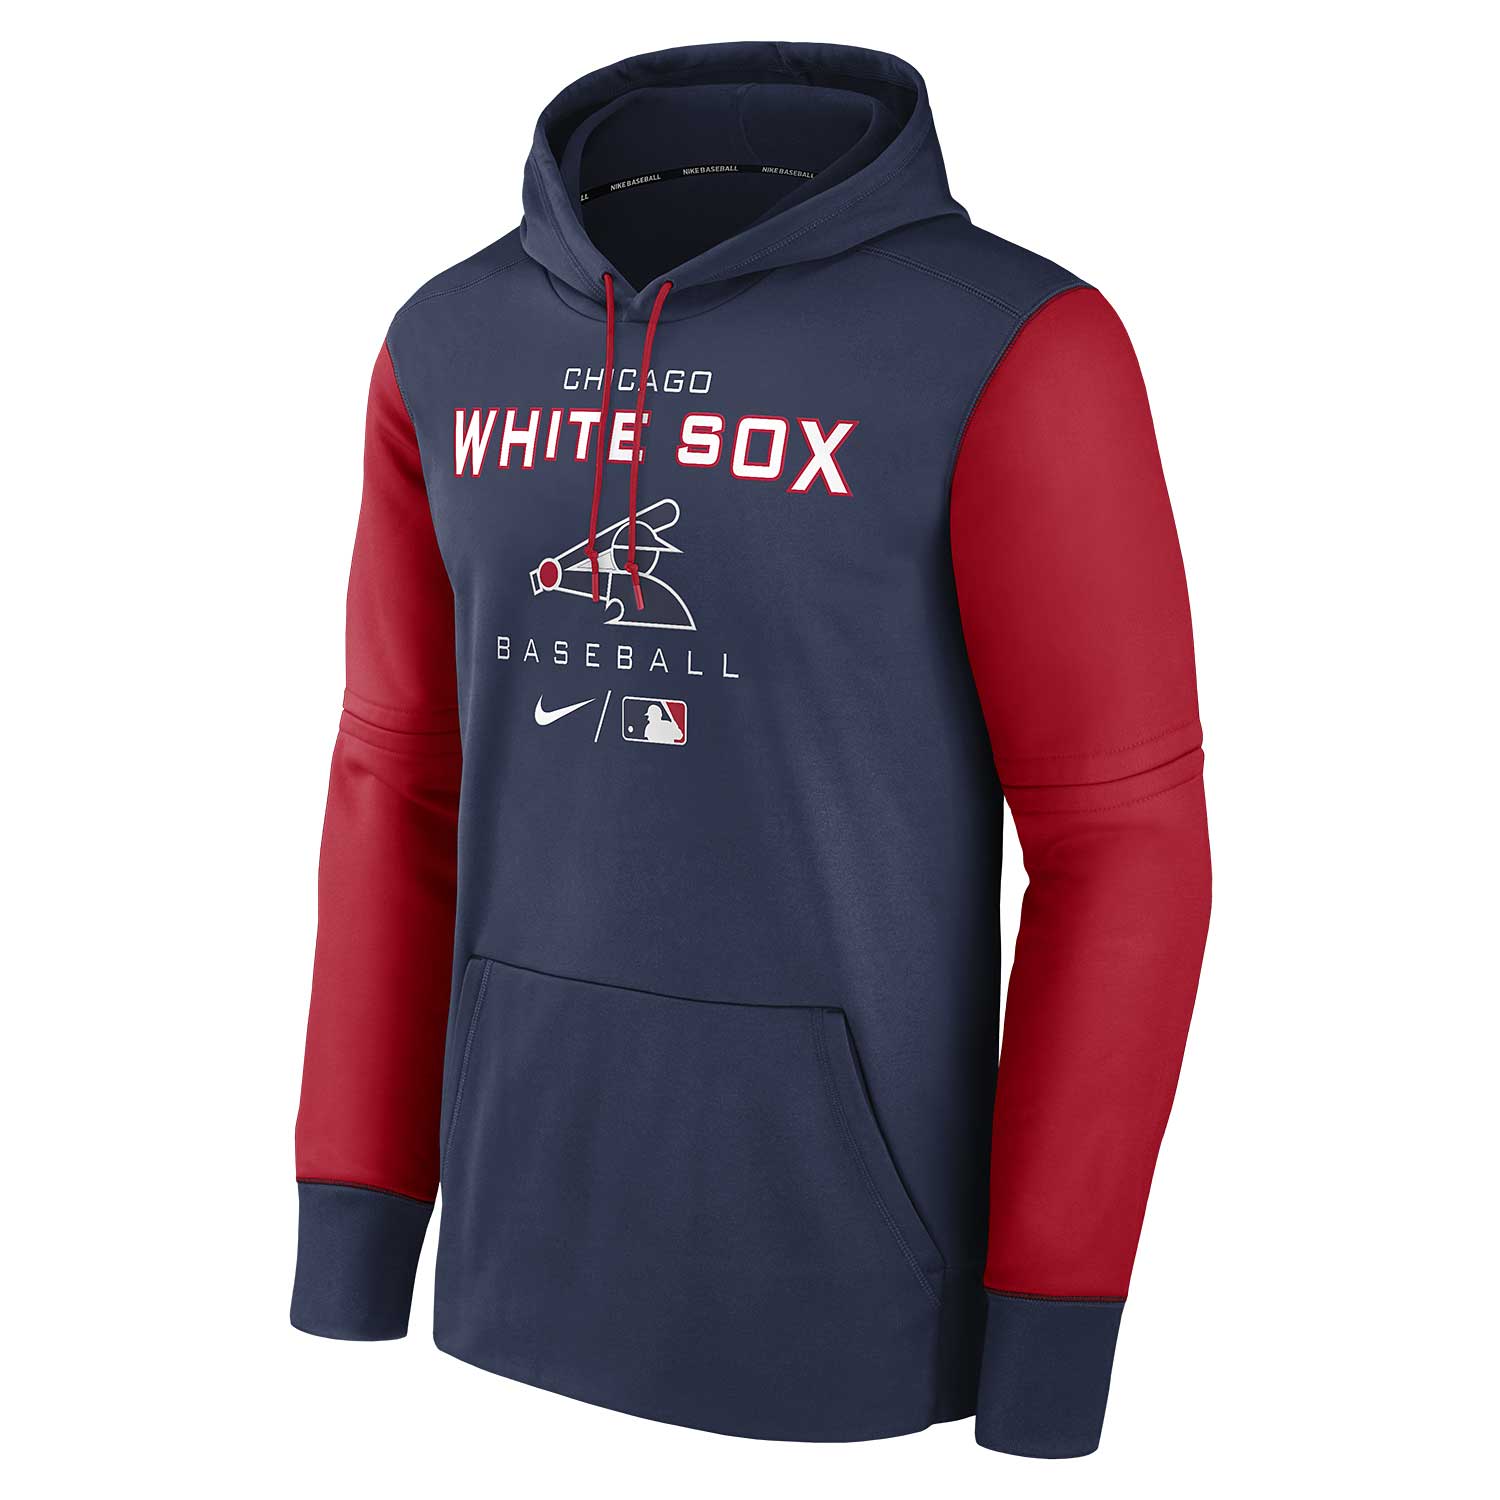 Men's Nike Red Boston Sox Authentic Collection Logo Performance Long Sleeve T-Shirt Size: Medium